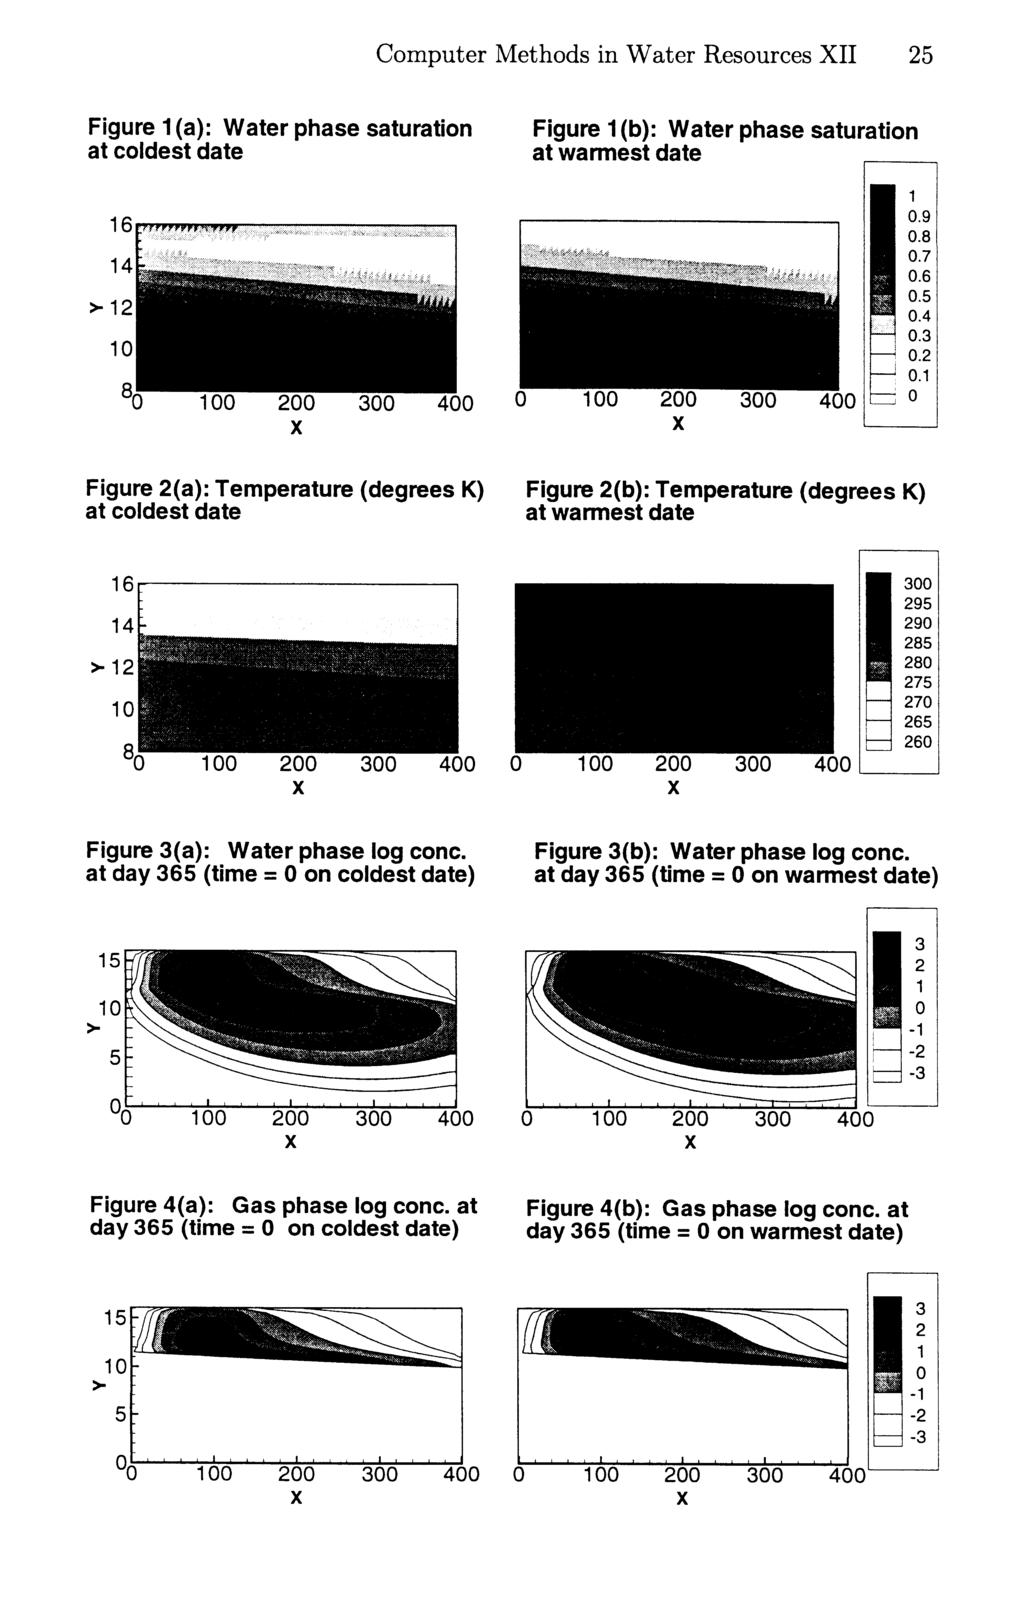 Figure 1 (a): Water phase saturation at coldest date Computer Methods in Water Resources XII 25 Figure 1 (b): Water phase saturation at warmest date 400 400 1 0.9 0.8 0.7 0.6 0.5 0.4 0.3 0.2 0.